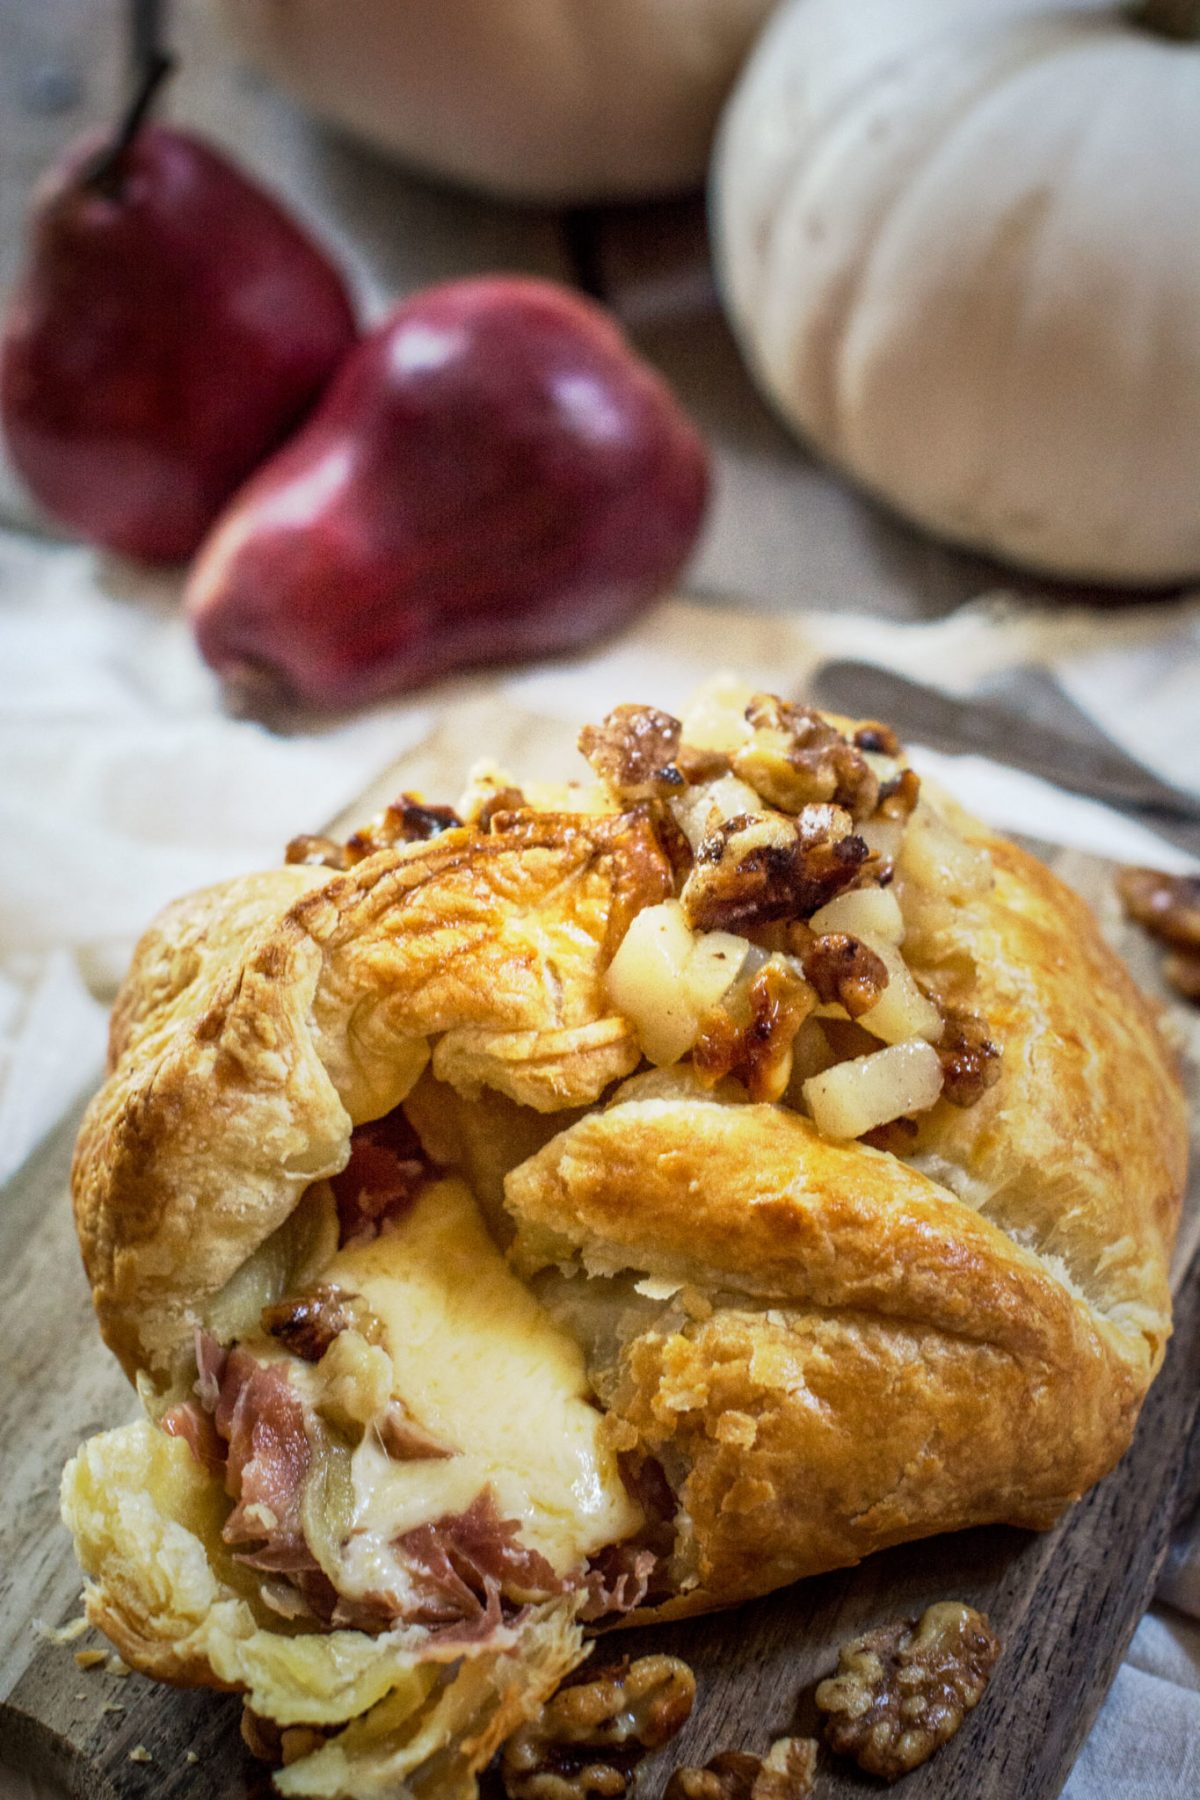 Prosciutto and Pastry-Wrapped Warm Gouda with Pear Compote